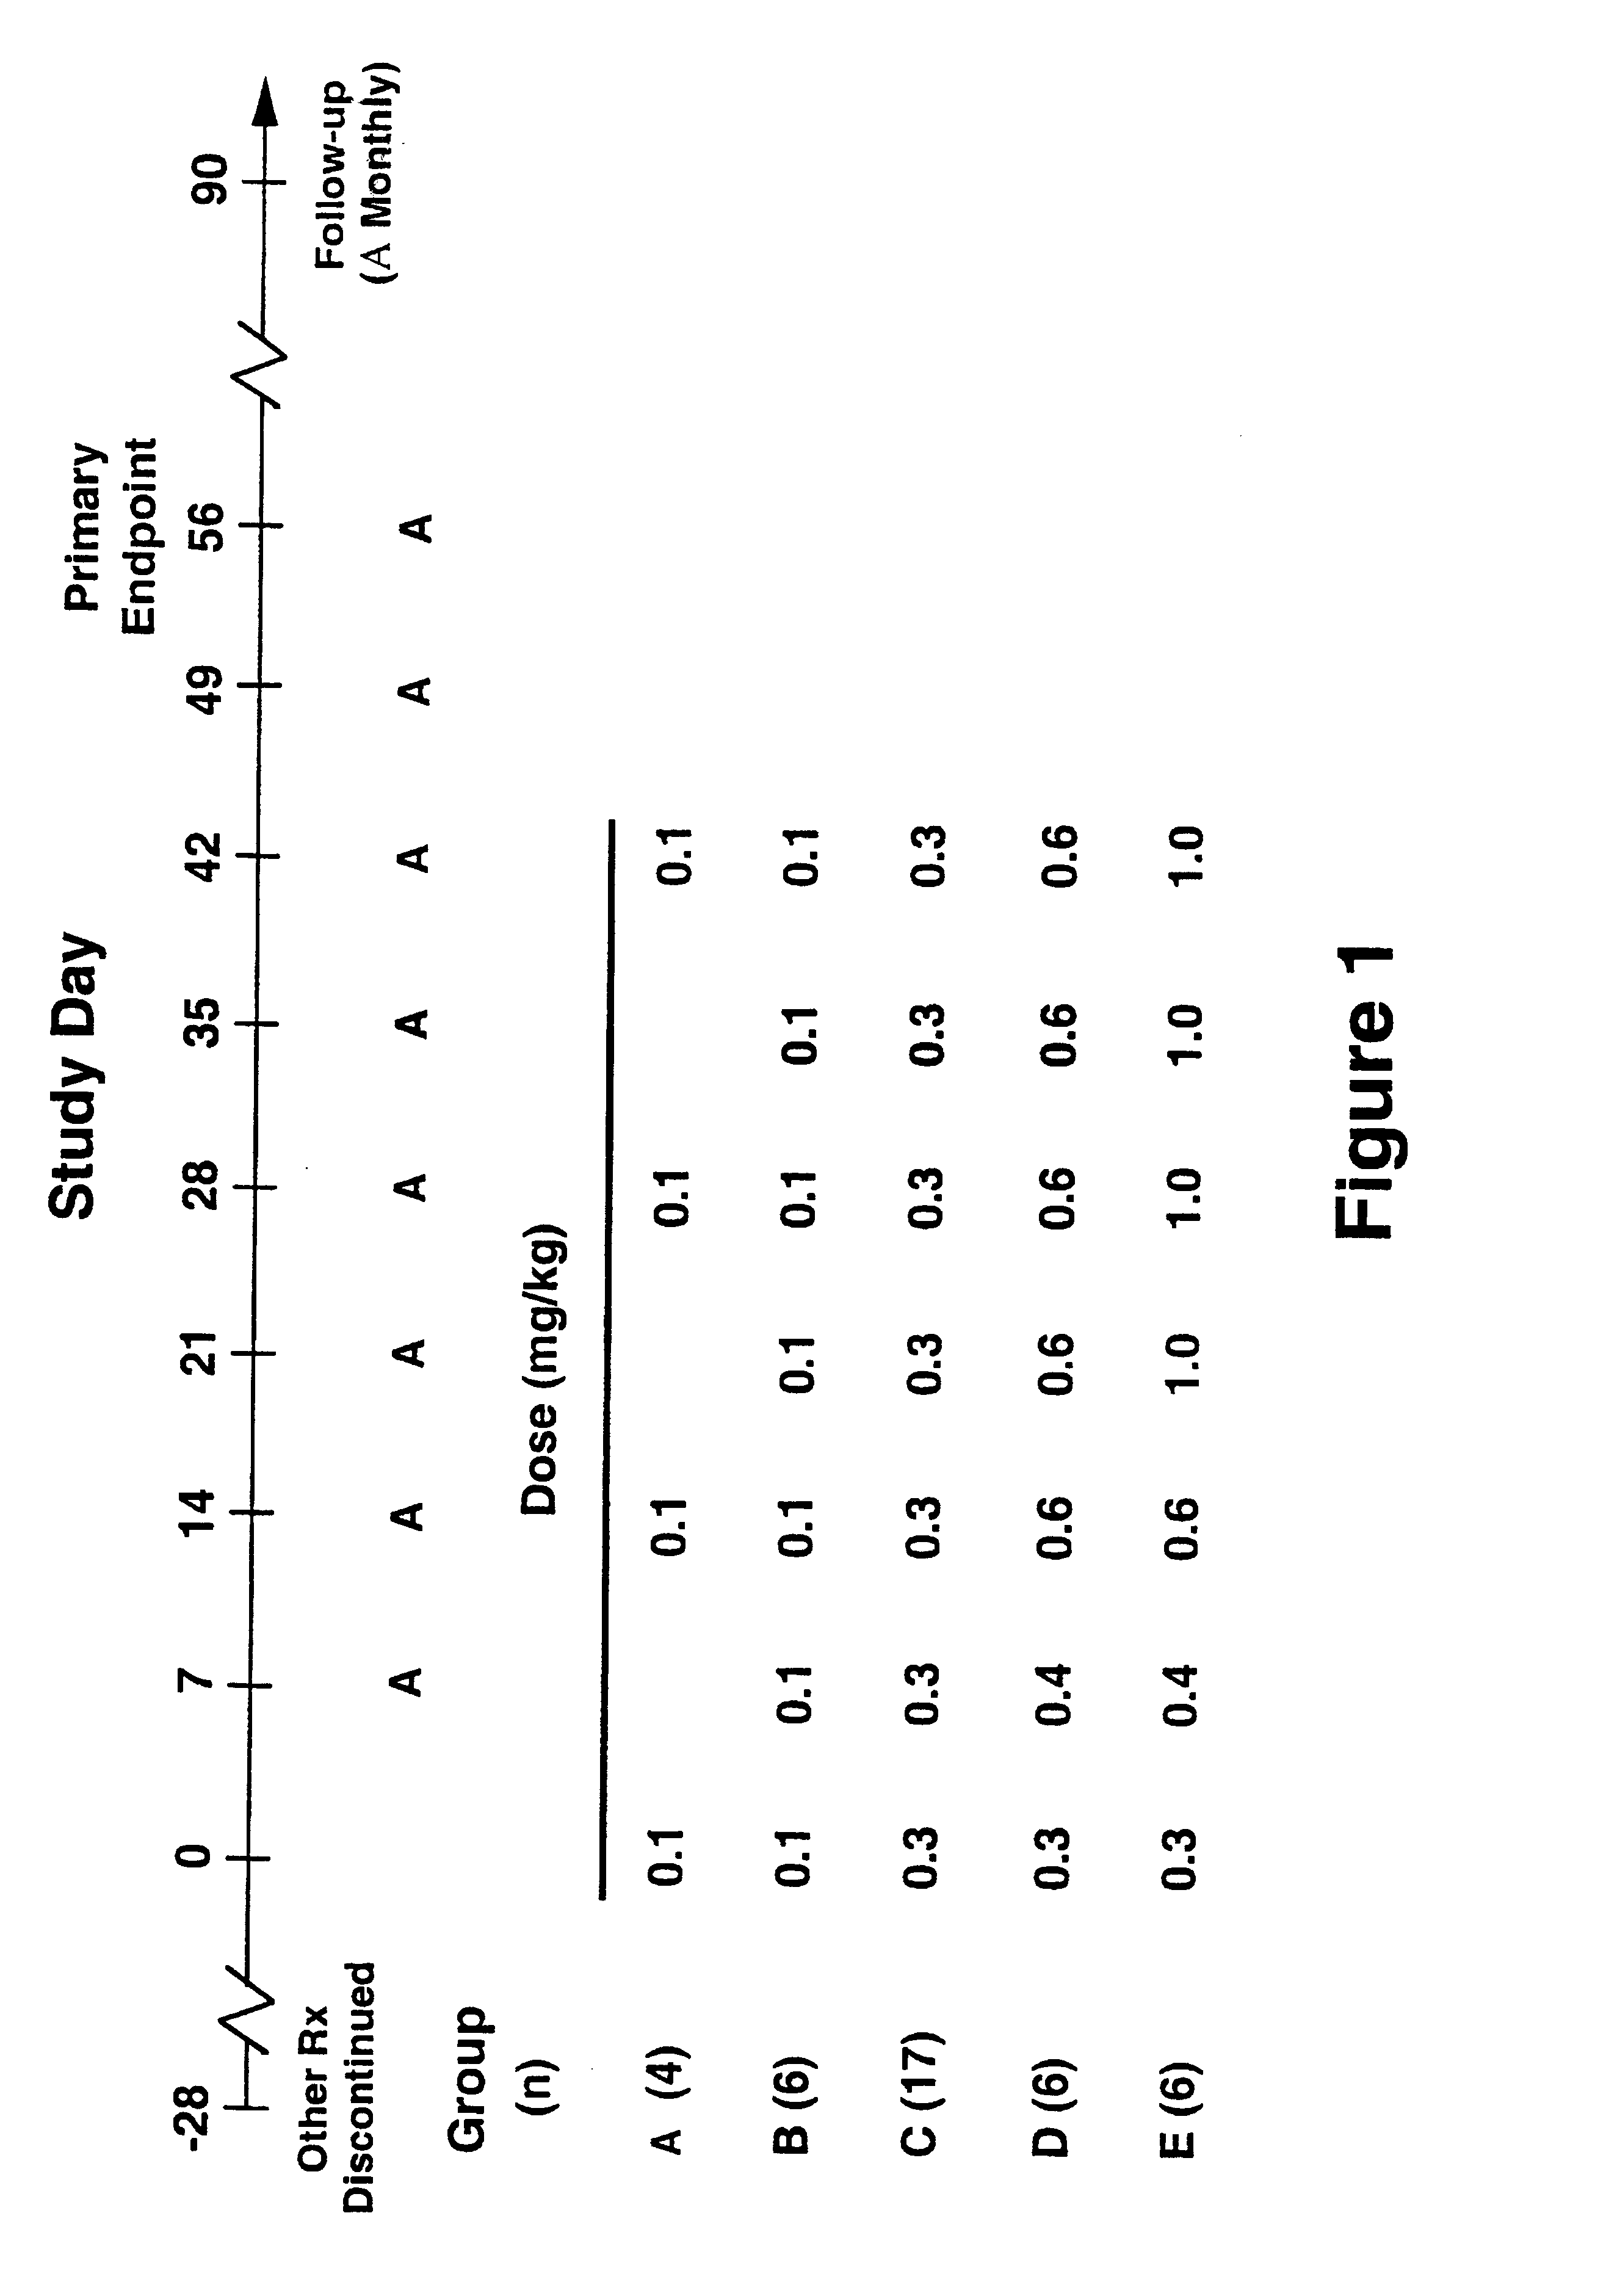 Treatment of LFA-1 associated disorders with increasing doses of LFA-1 antagonist